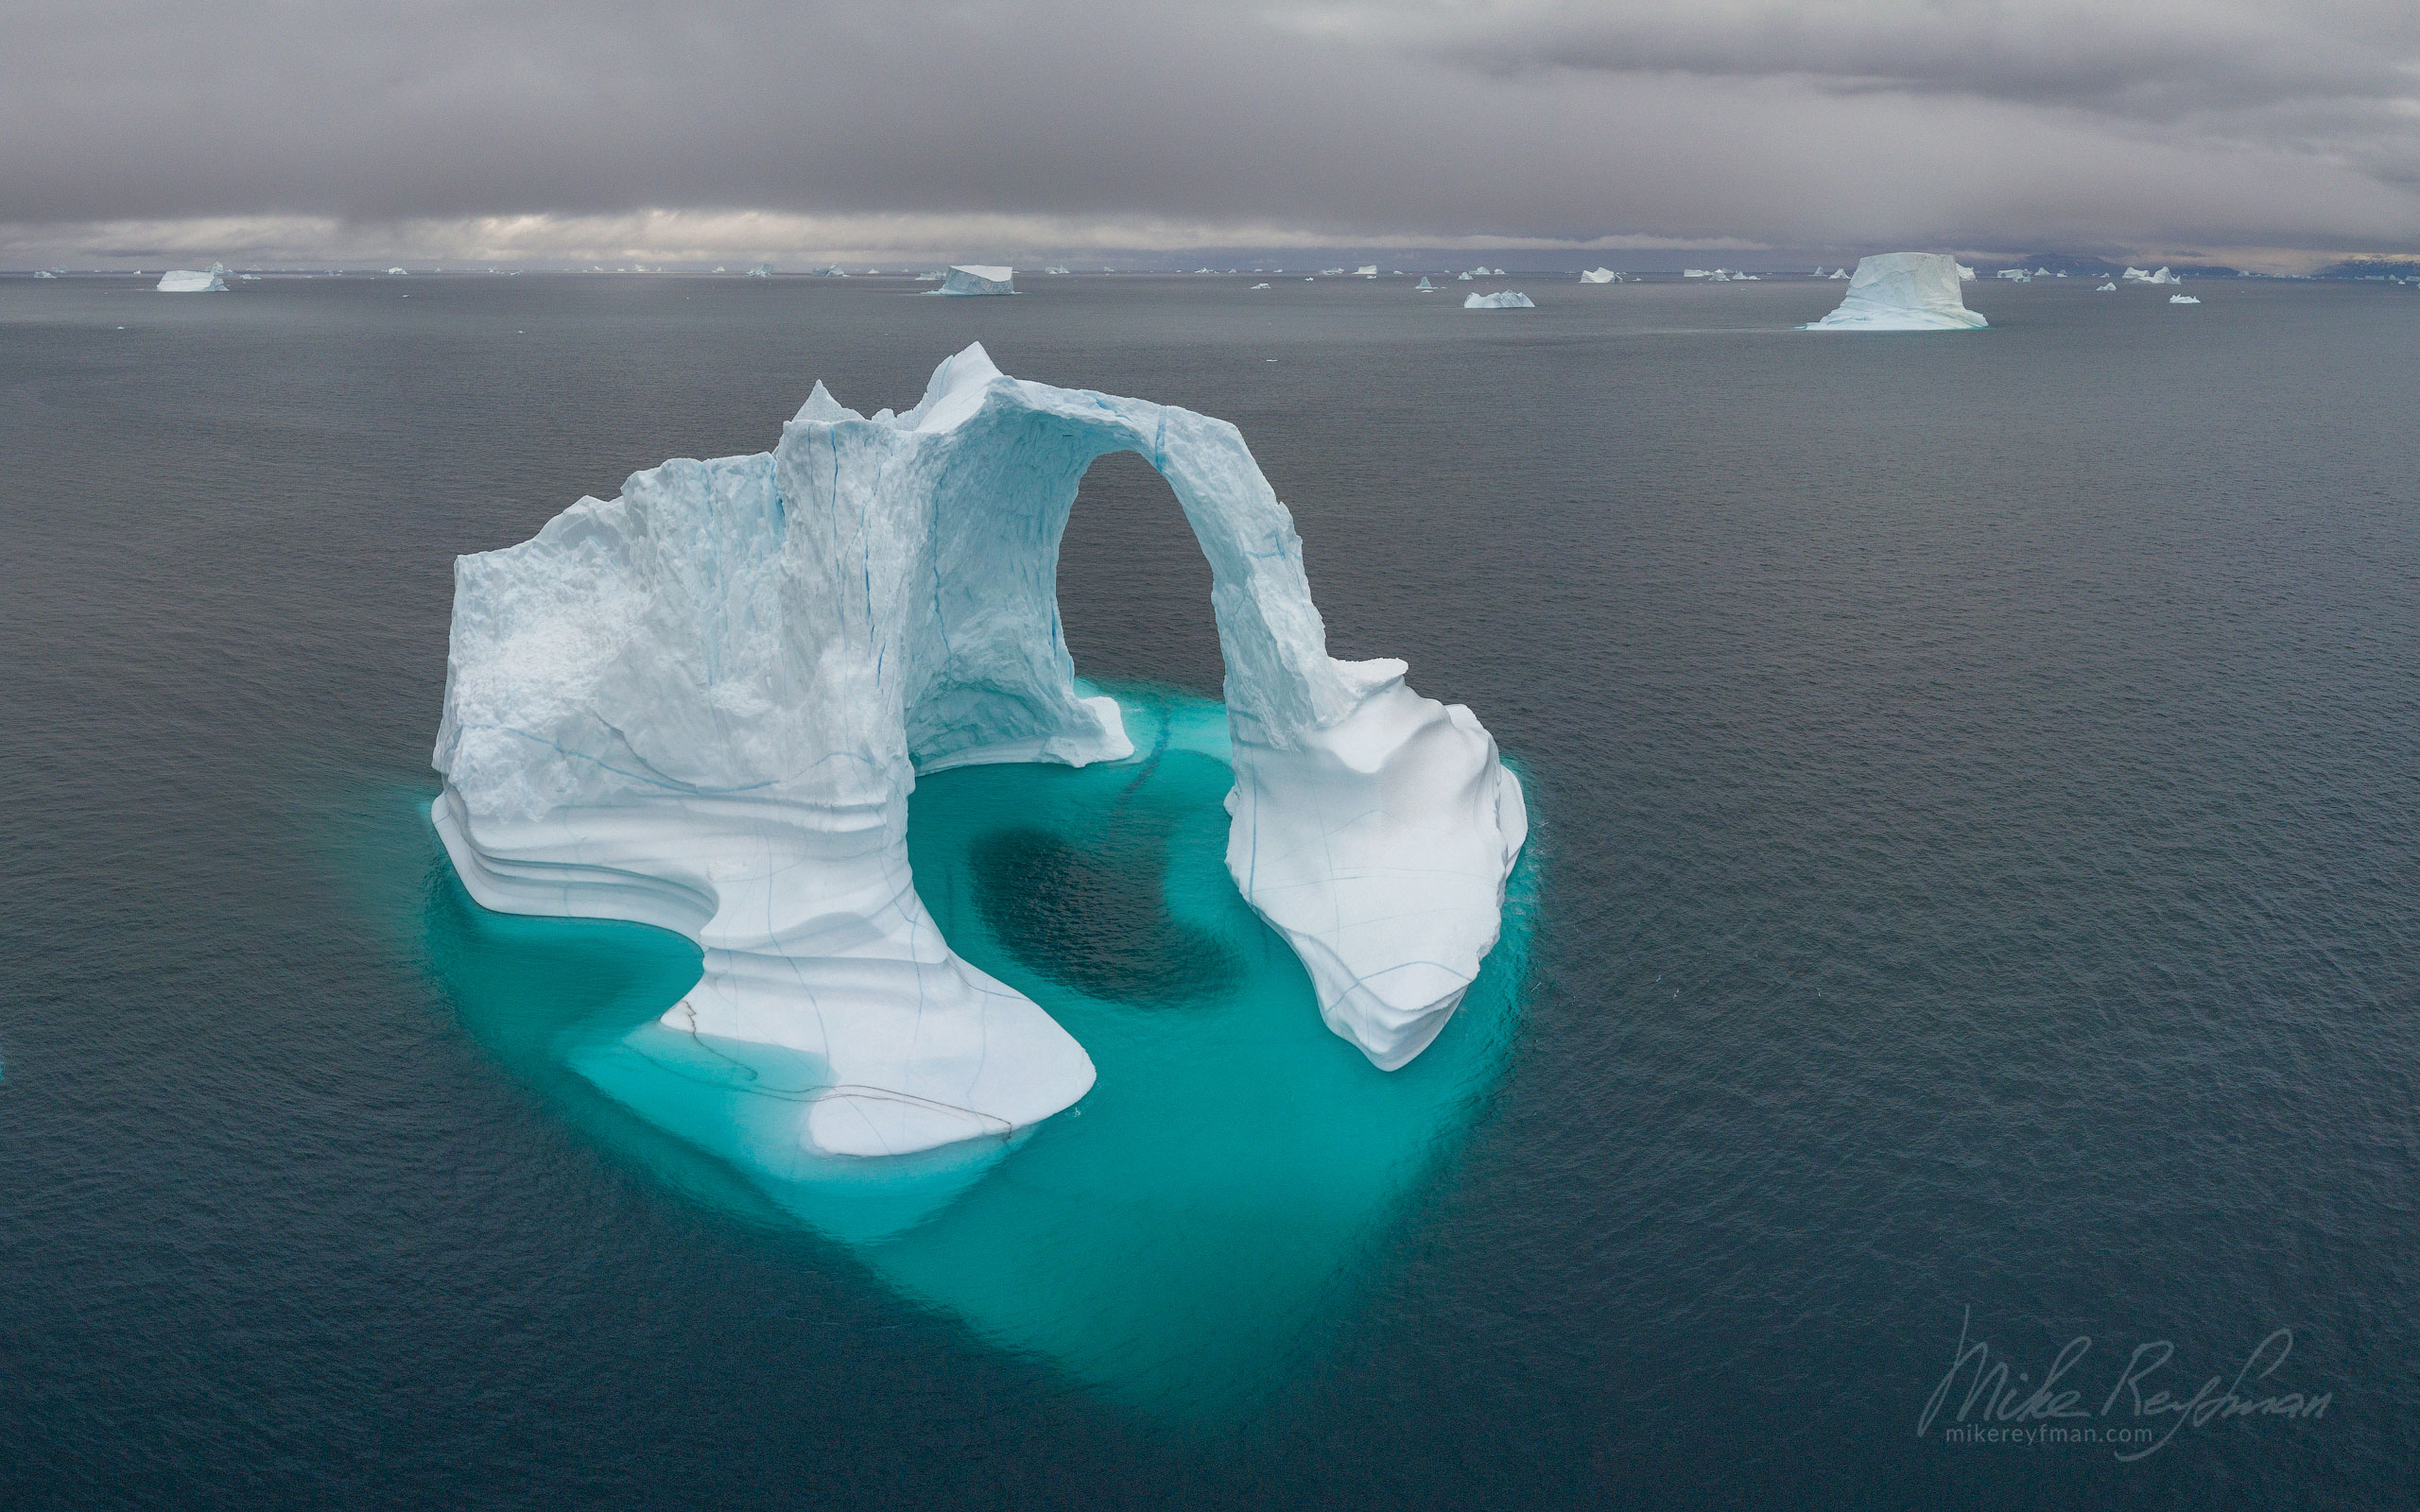 Iceberg in Scoresby Sund. Greenland. Aerial. 064-GR-SC_DJI_0466 - The Scoresby Sund fjord system and the settlement of Ittoqqortoormiit. East Greenland. - Mike Reyfman Photography